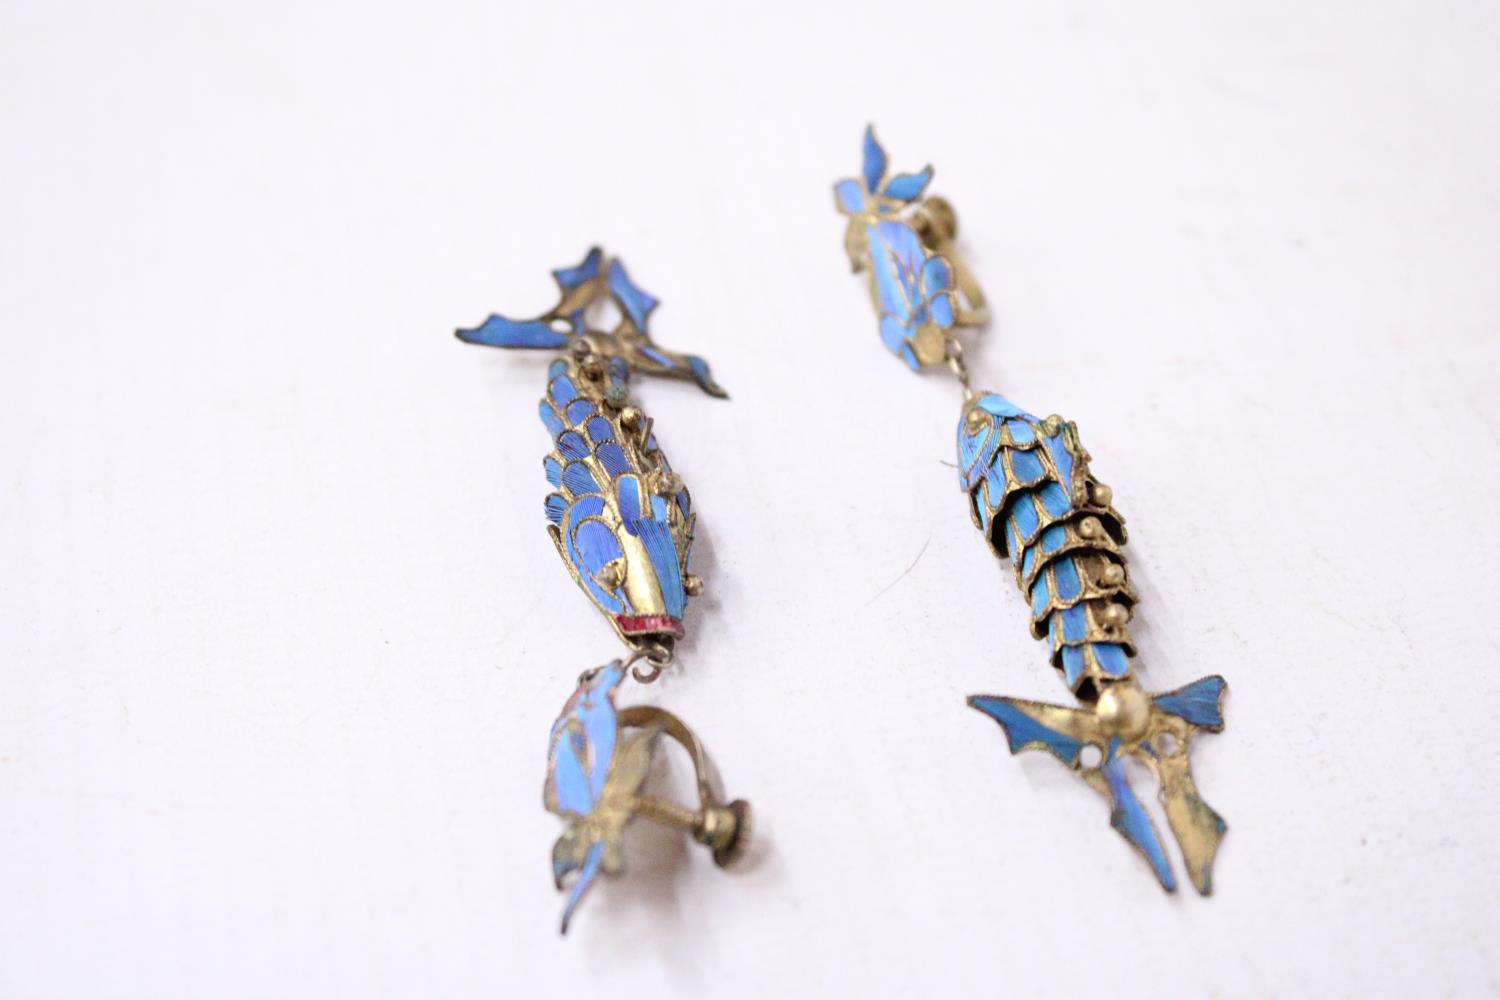 A QING DYNASTY KINGFISHER FEATHER ANTIQUE EDWARDIAN CIRCA EARLY 19TH CENTURY TIAN-TSUI SCREW BACK - Image 2 of 5